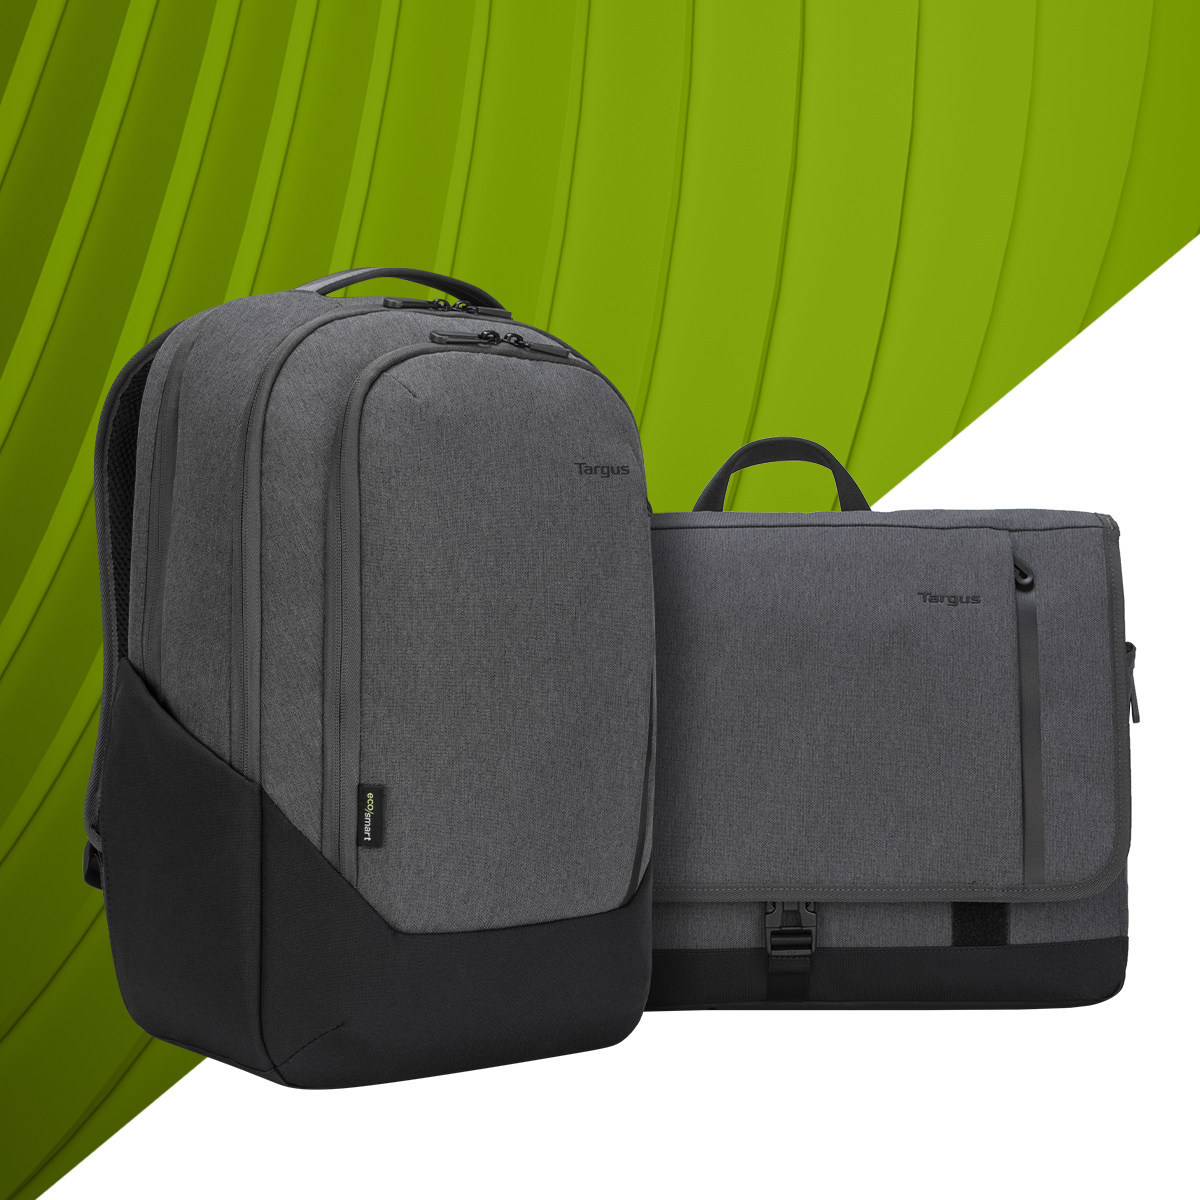 CES: Targus brings sustainability to laptop bags – Gadget